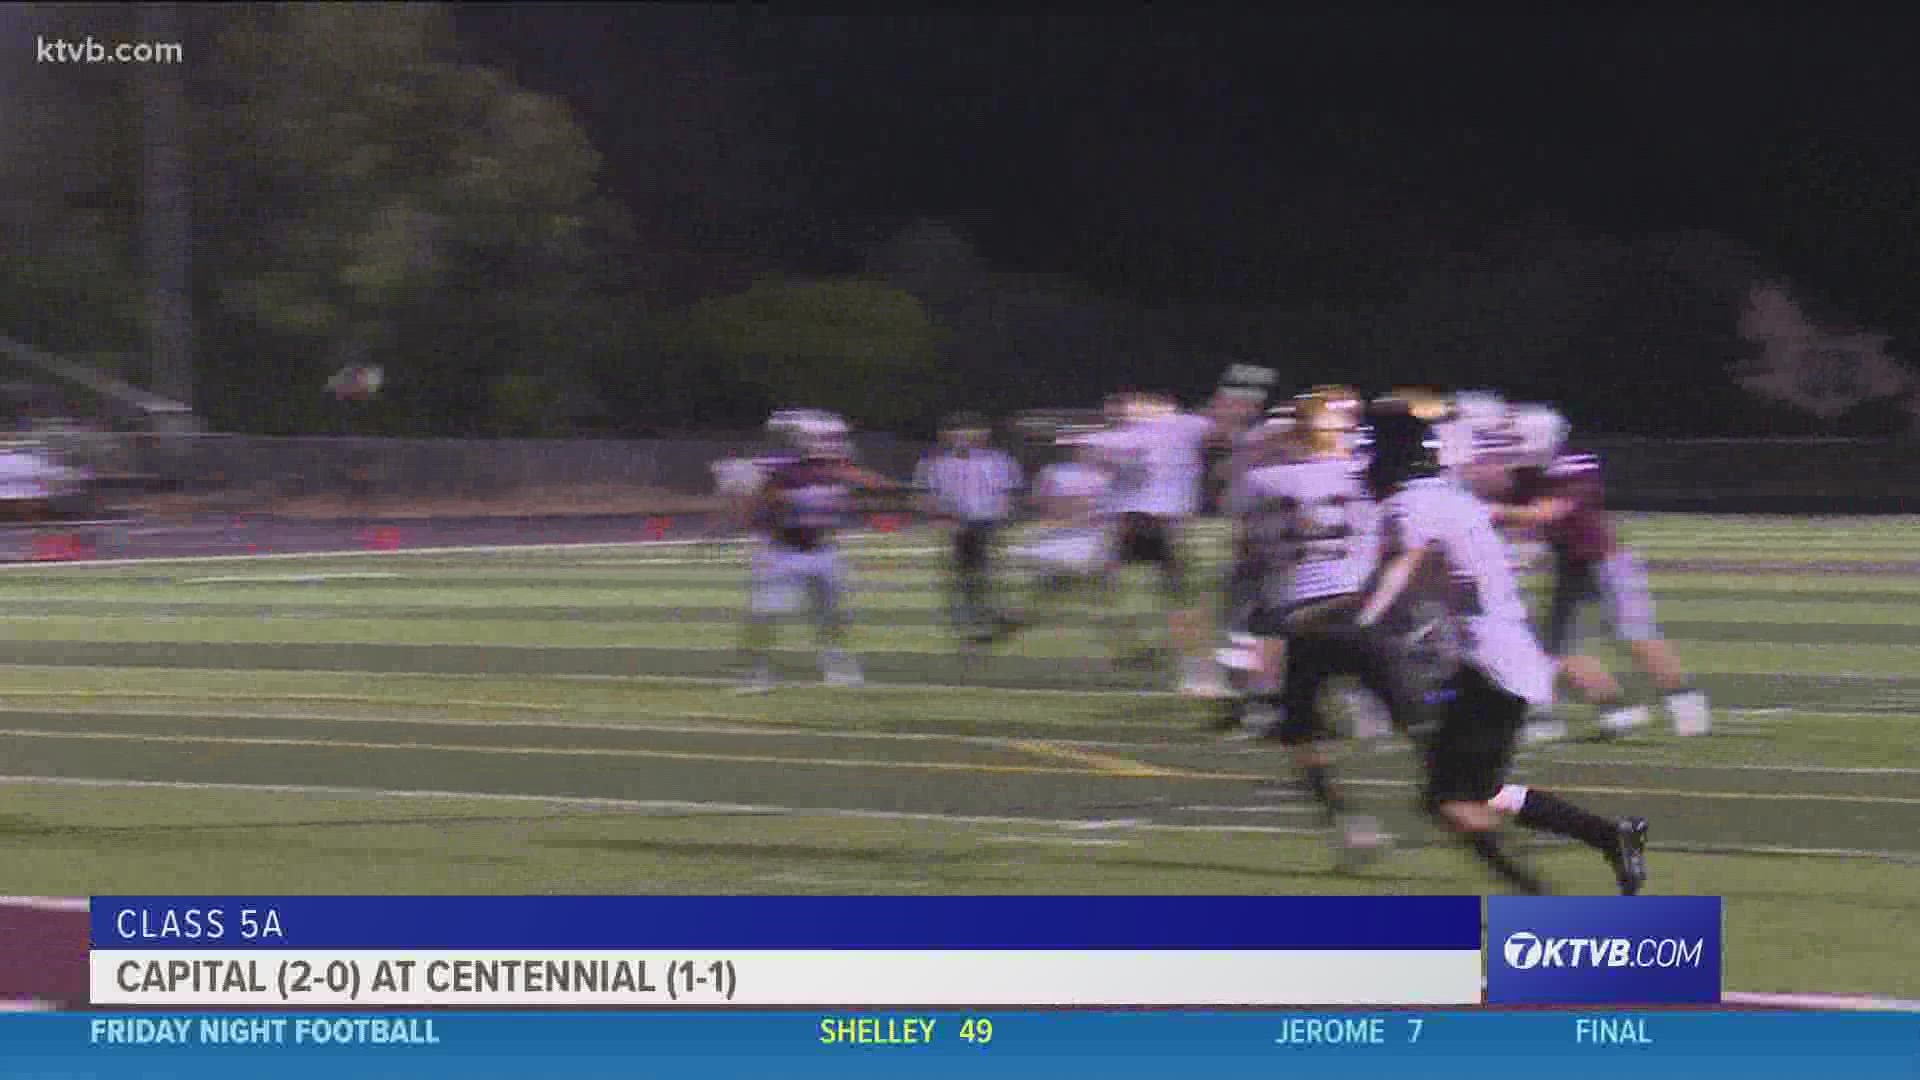 The Eagles improve to 3-0 after an impressive win over Centennial.